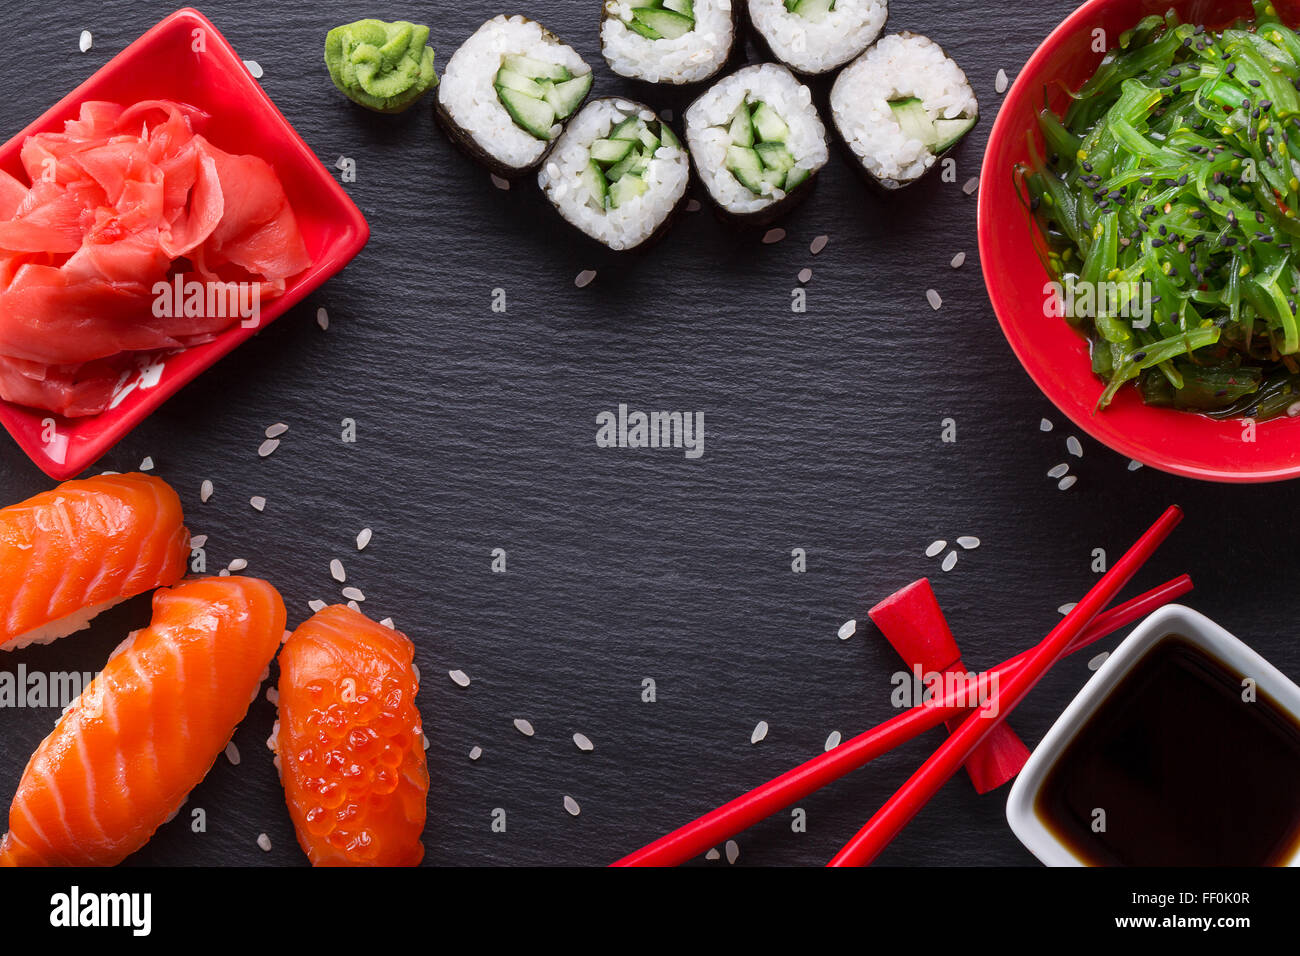 sushi and rolls on a slate table. Stock Photo